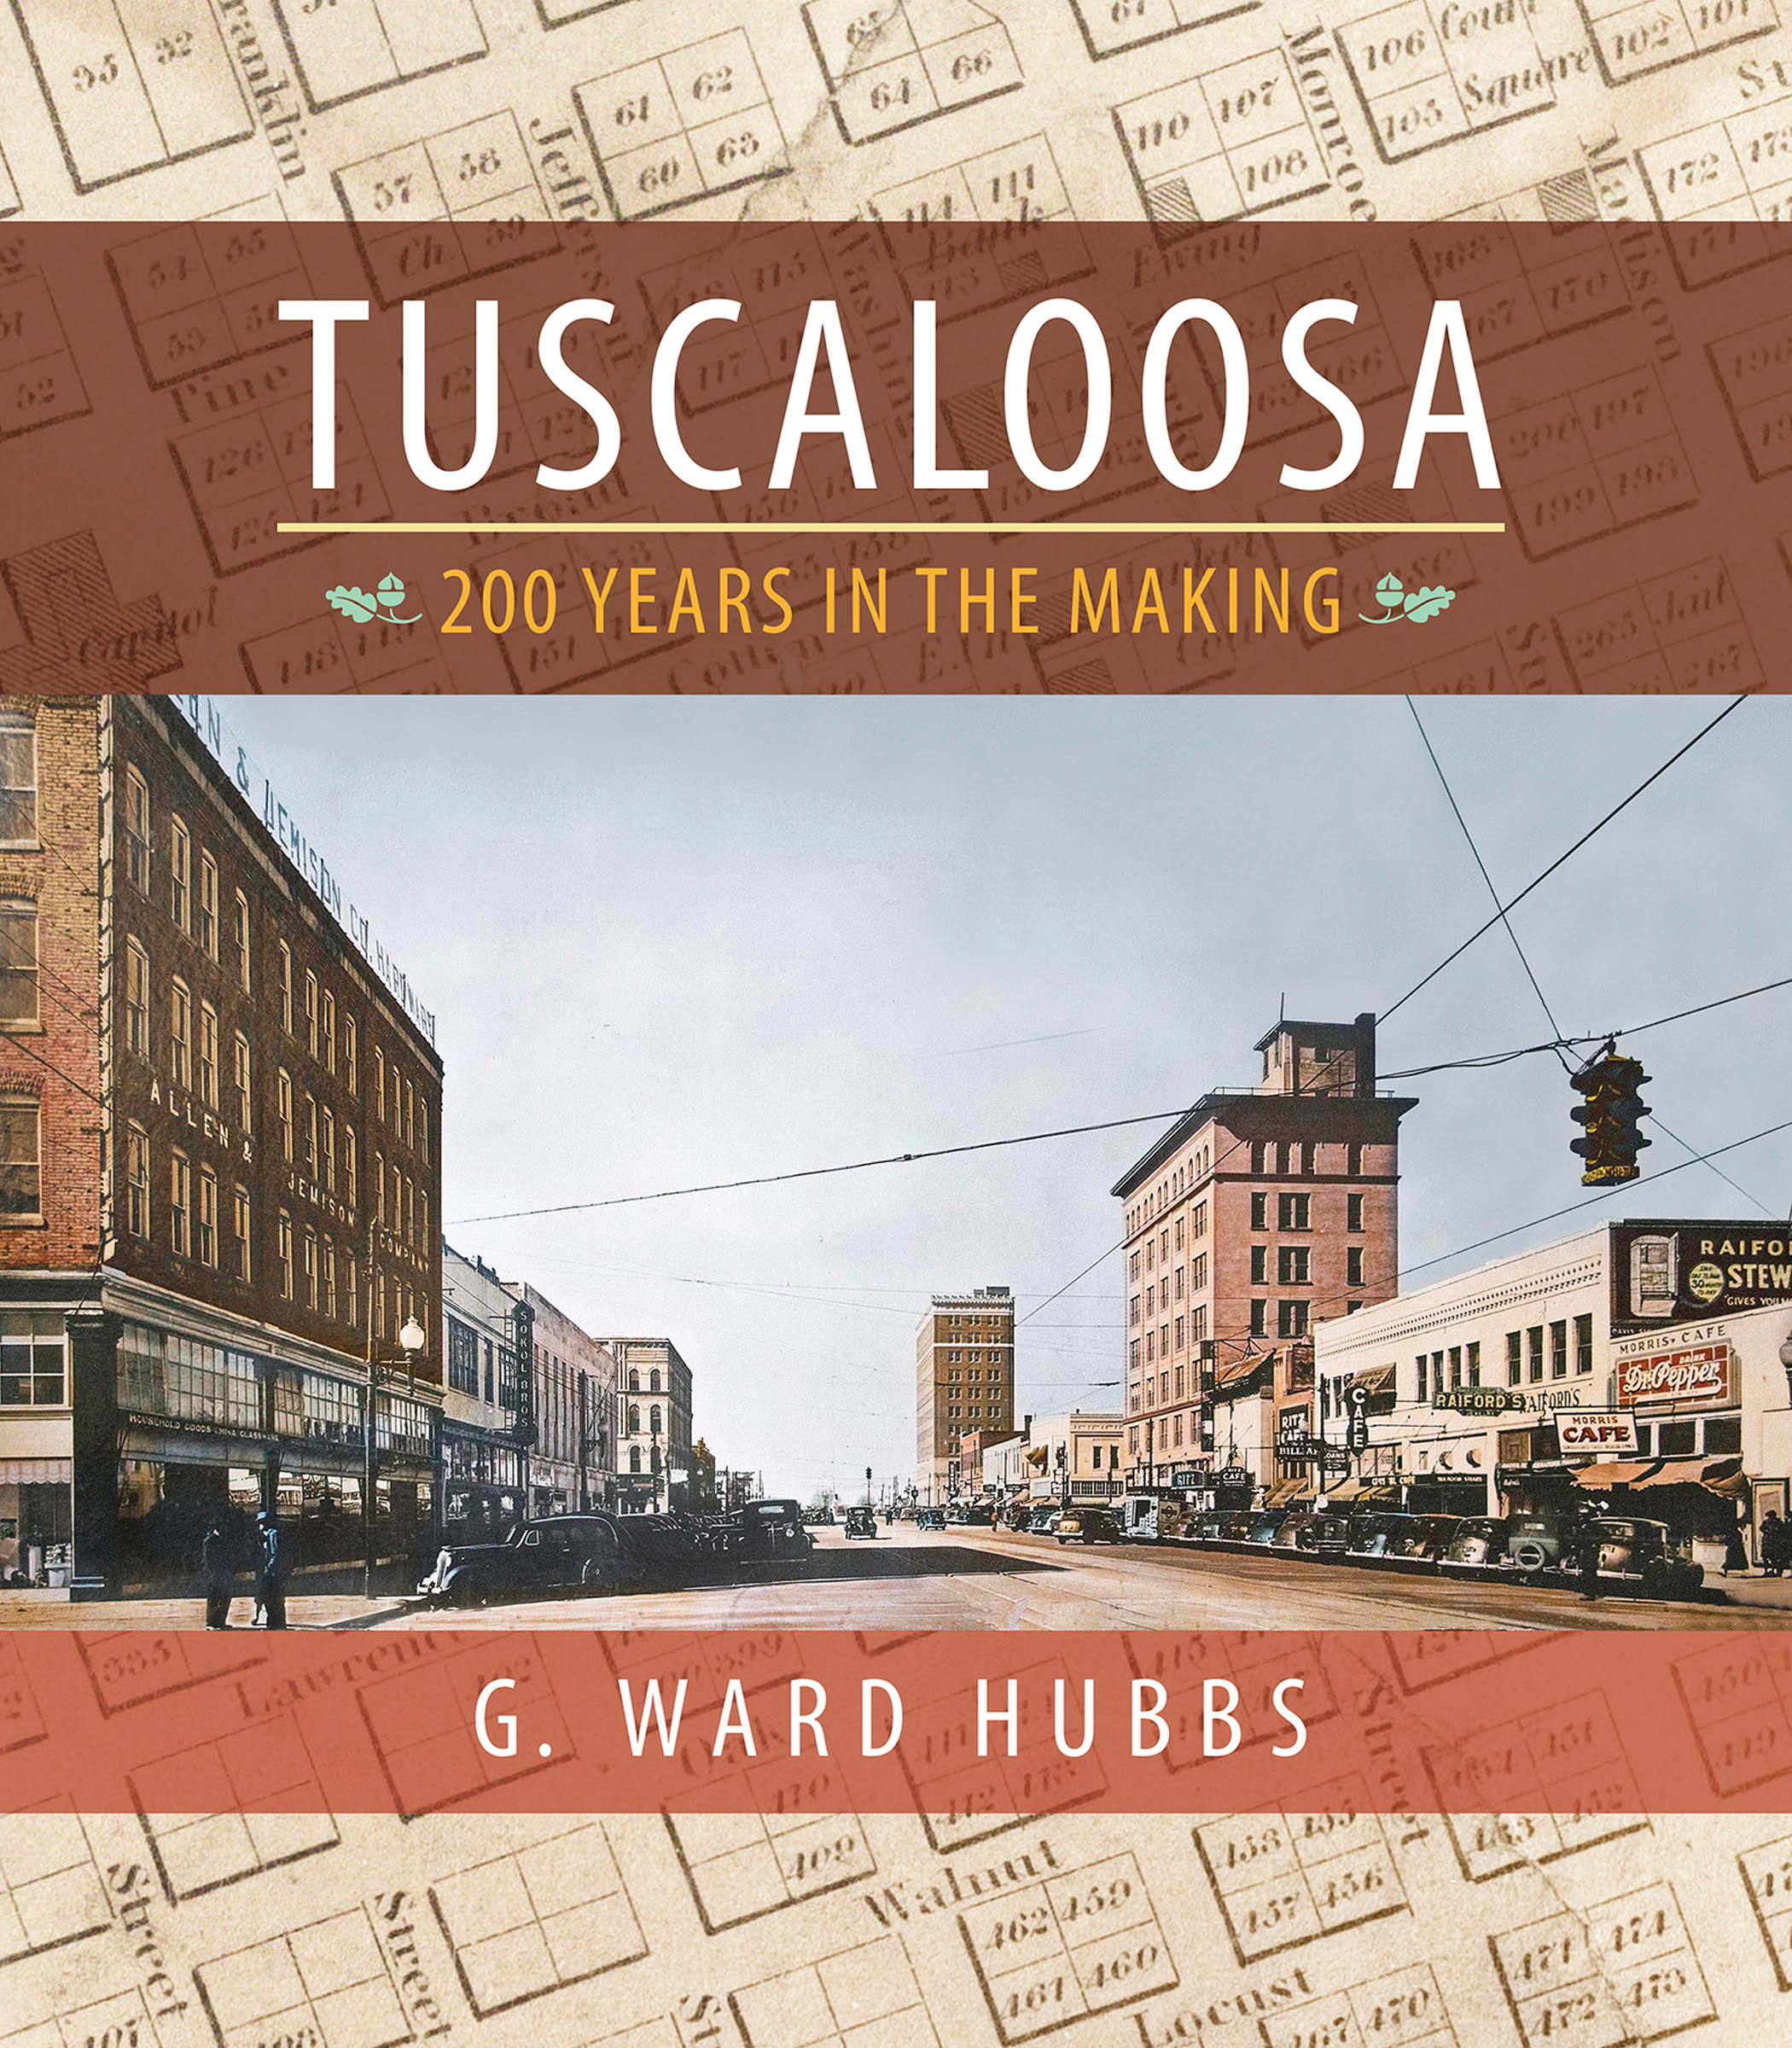 the cover of Tuscaloosa 200 Years in the Making